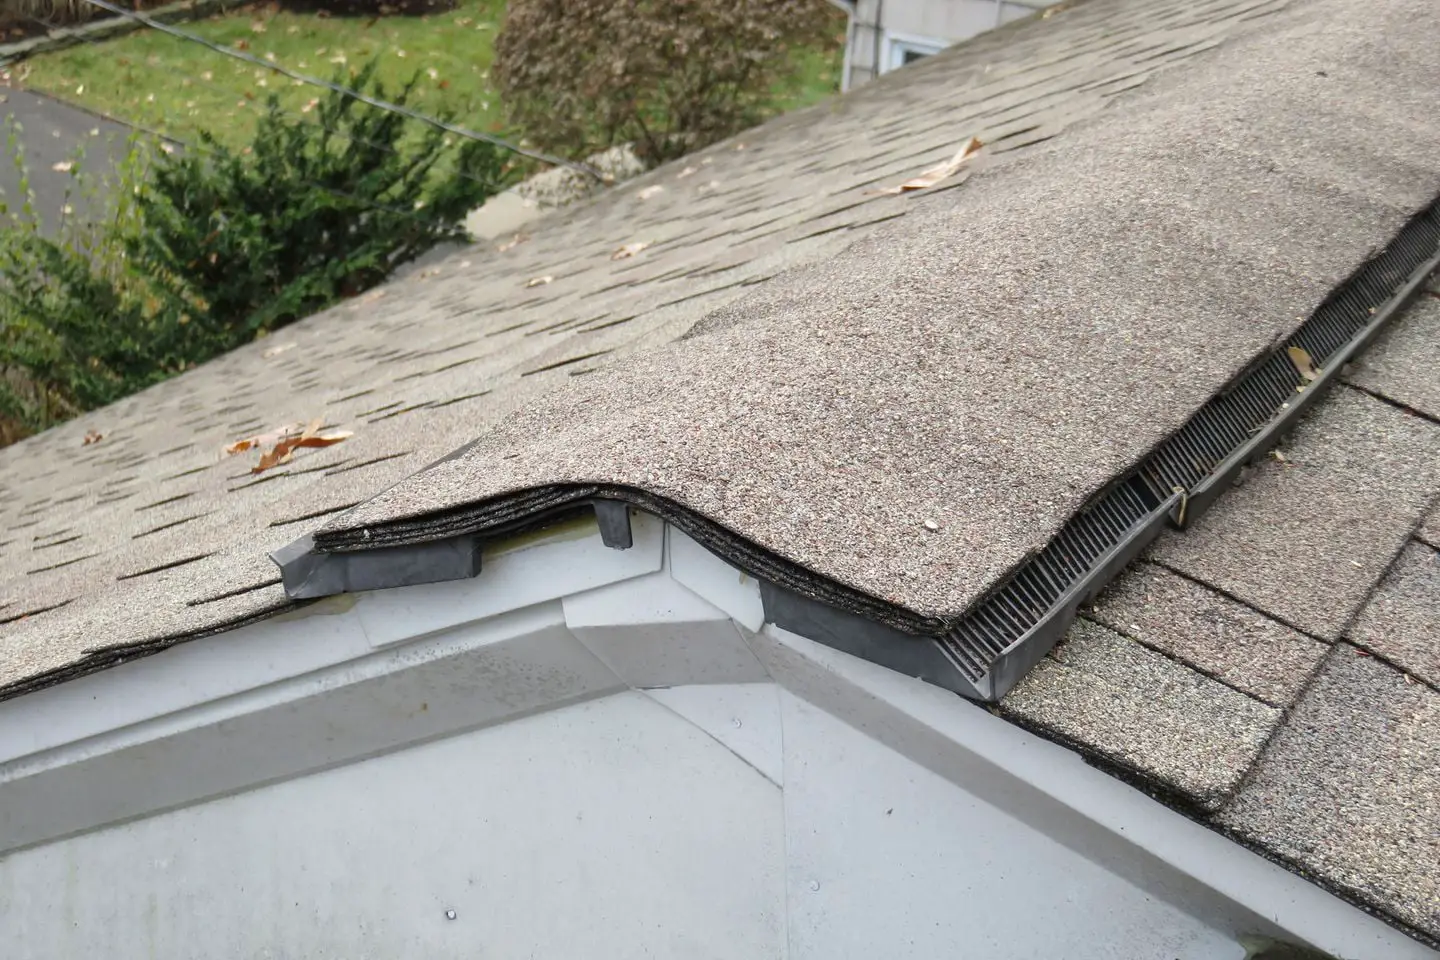 How to replace roof cap shingles